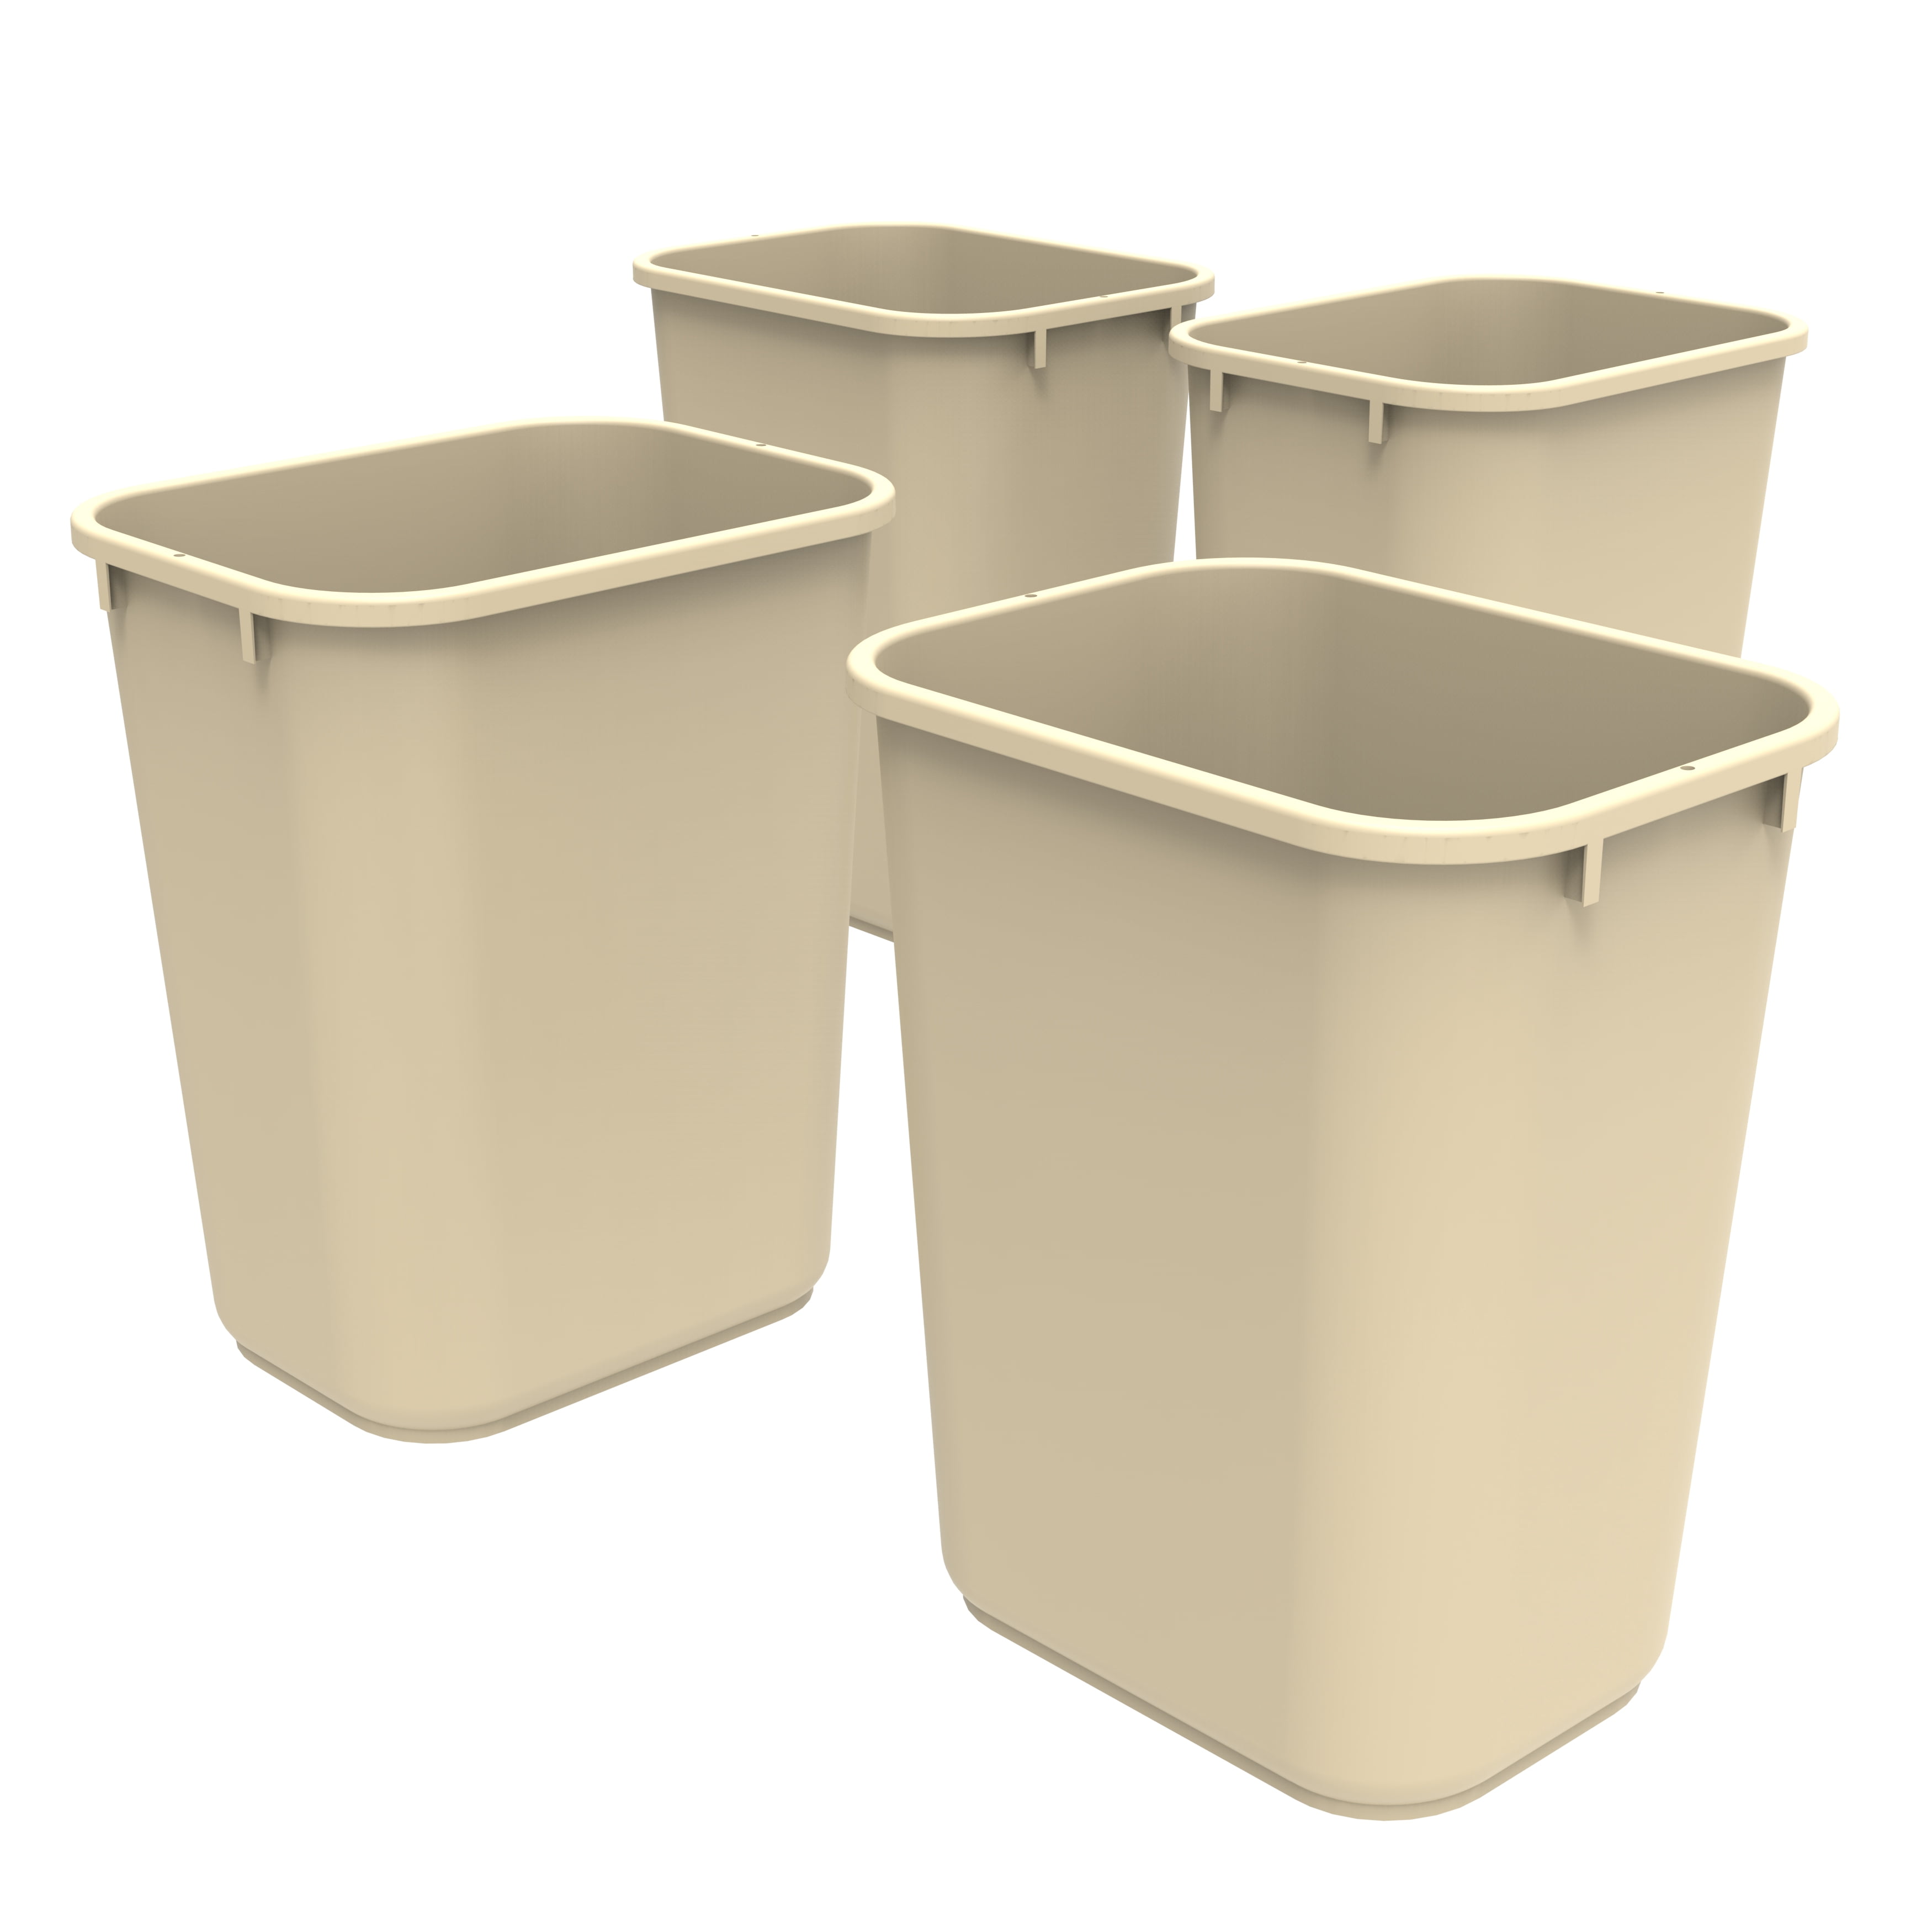 Waste Basket, 25 Gallon, Beige, Plastic, Square, Continental 25BE